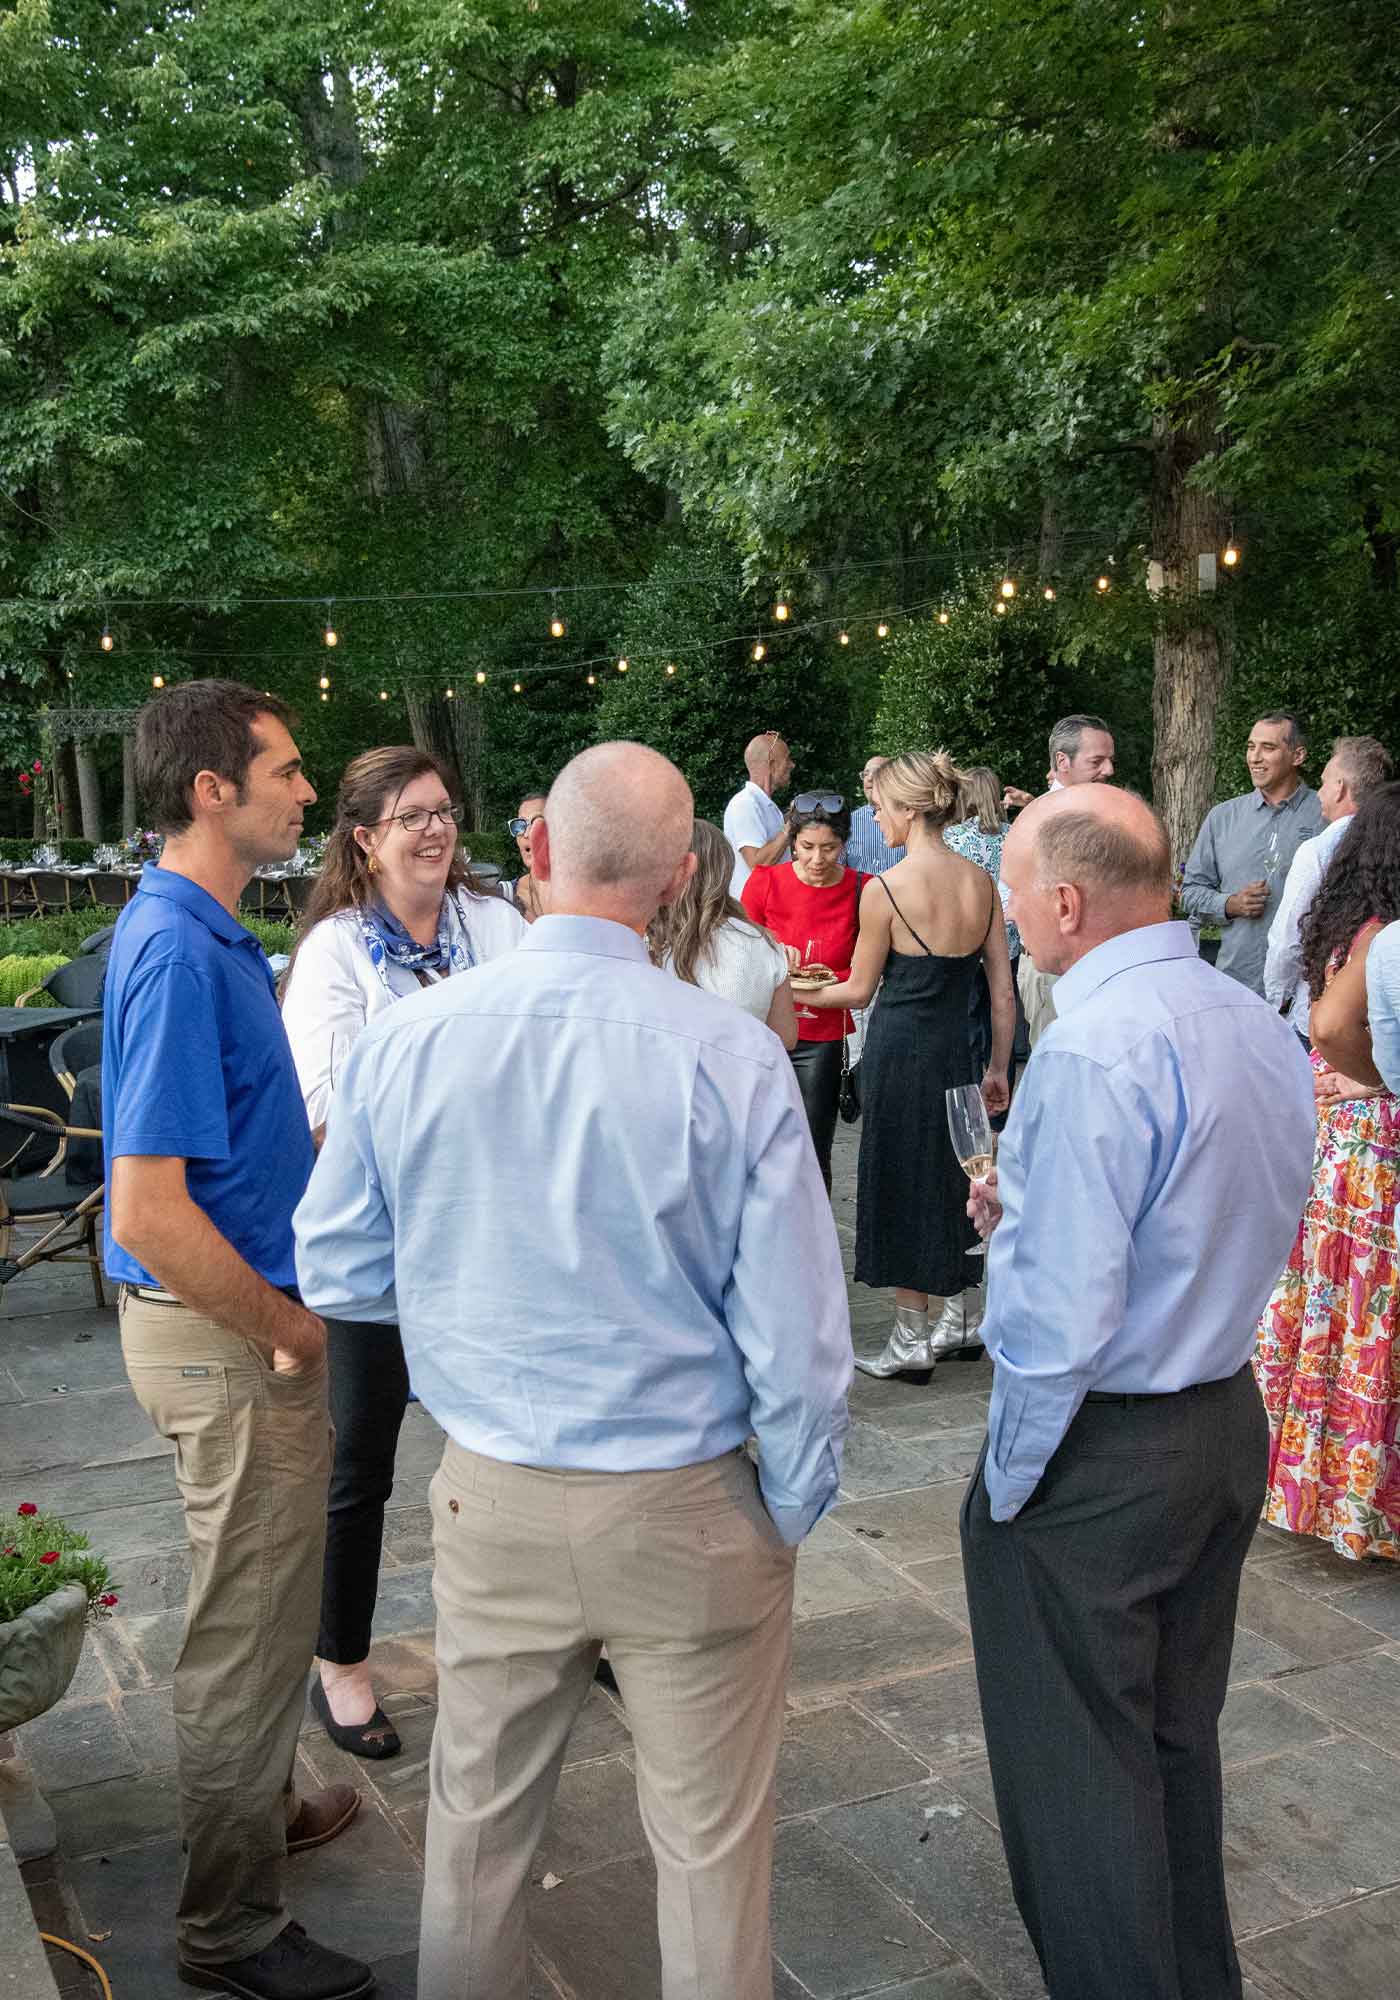 Winemaker Benoit Pineau, Virginia Commissioner of Agriculture Joe Guthrie, publisher Jennifer Bryerton, and Gardiner Hallock President of Monticello at Michael Shaps Wineworks. french winemakers in virginia and virginia wine in france